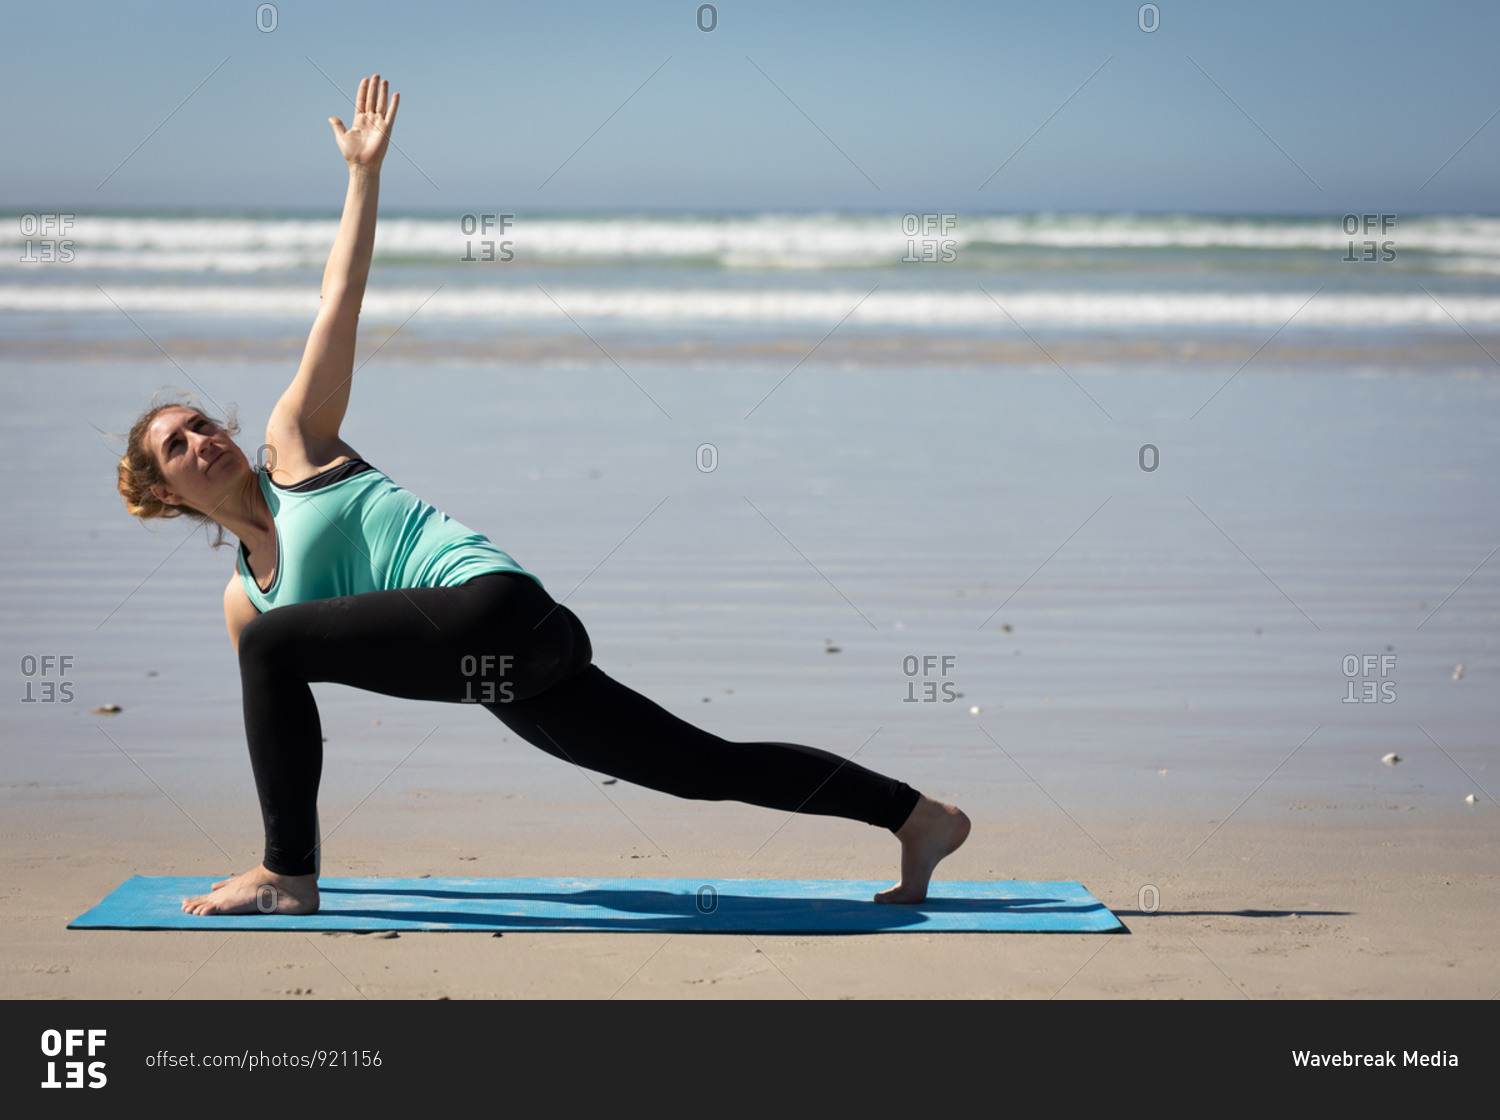 Side view of a Caucasian attractive woman, wearing sports clothes, practicing yoga on yoga mat, stretching in yoga position, on the sunny beach.